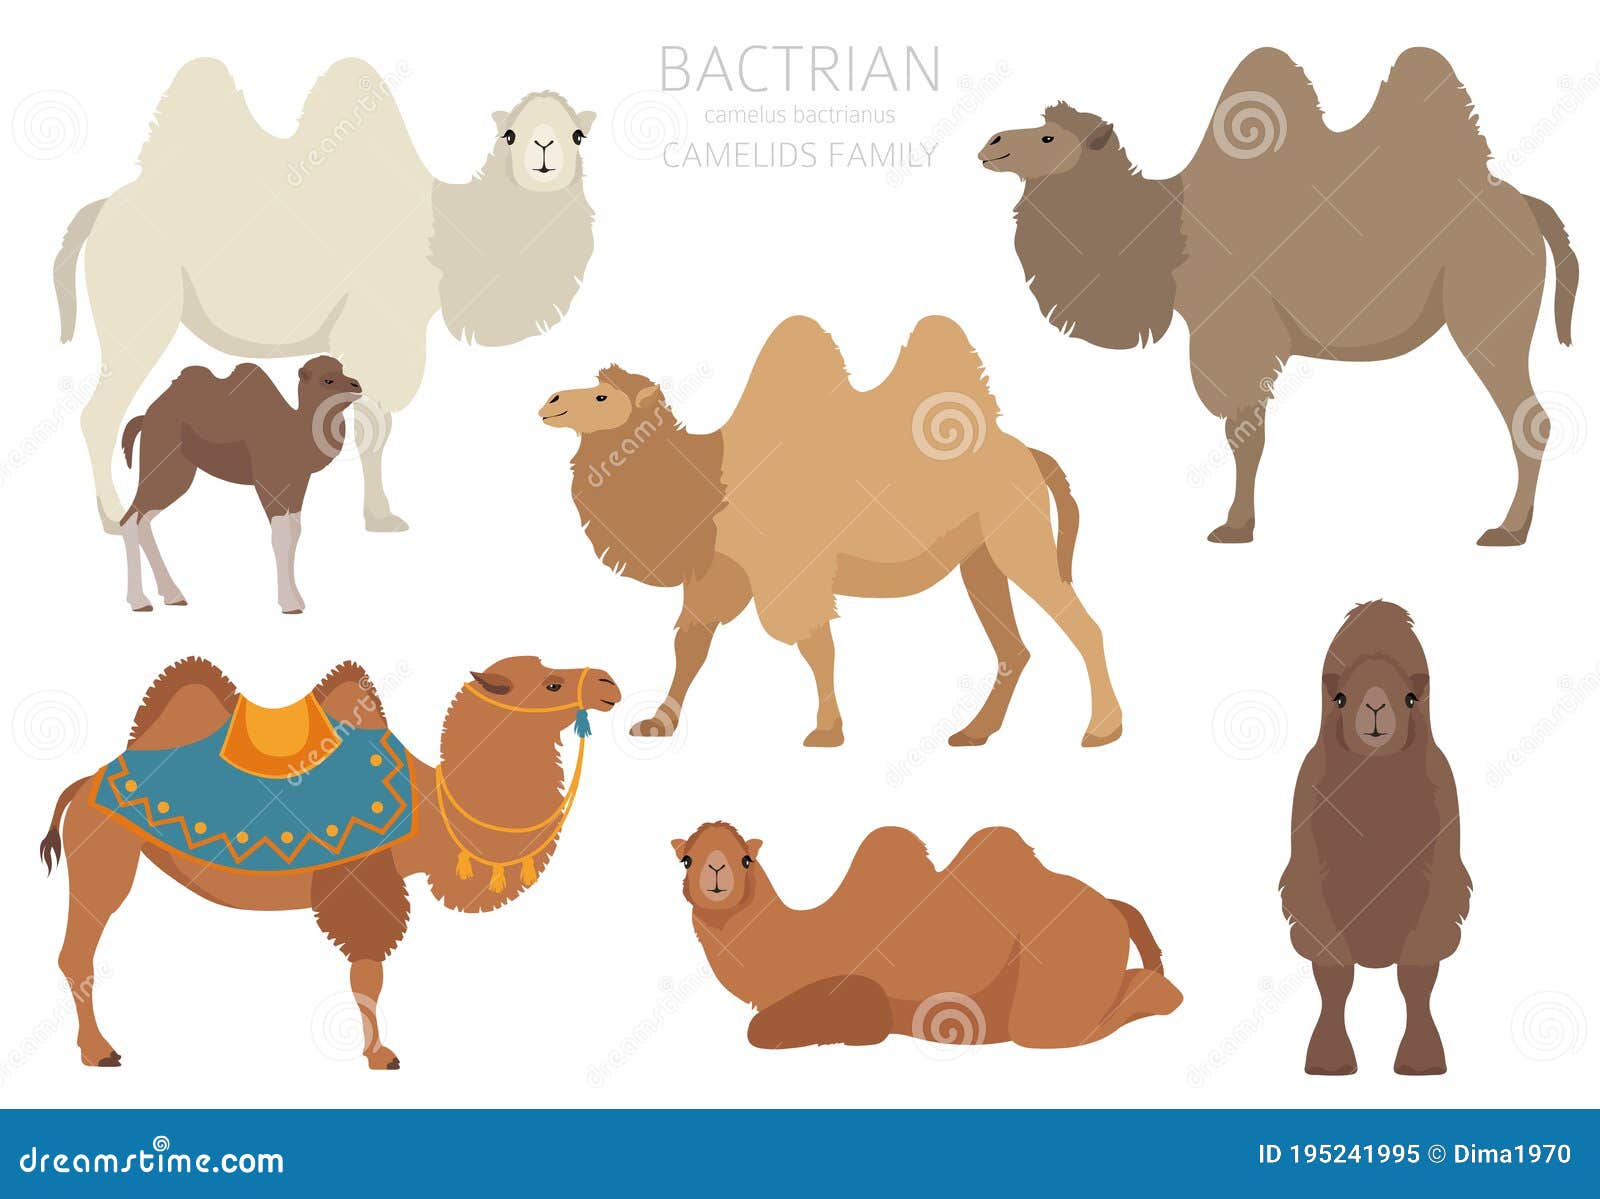 Camelids Family Collection. Bactrian Camel Infographic Design Stock ...